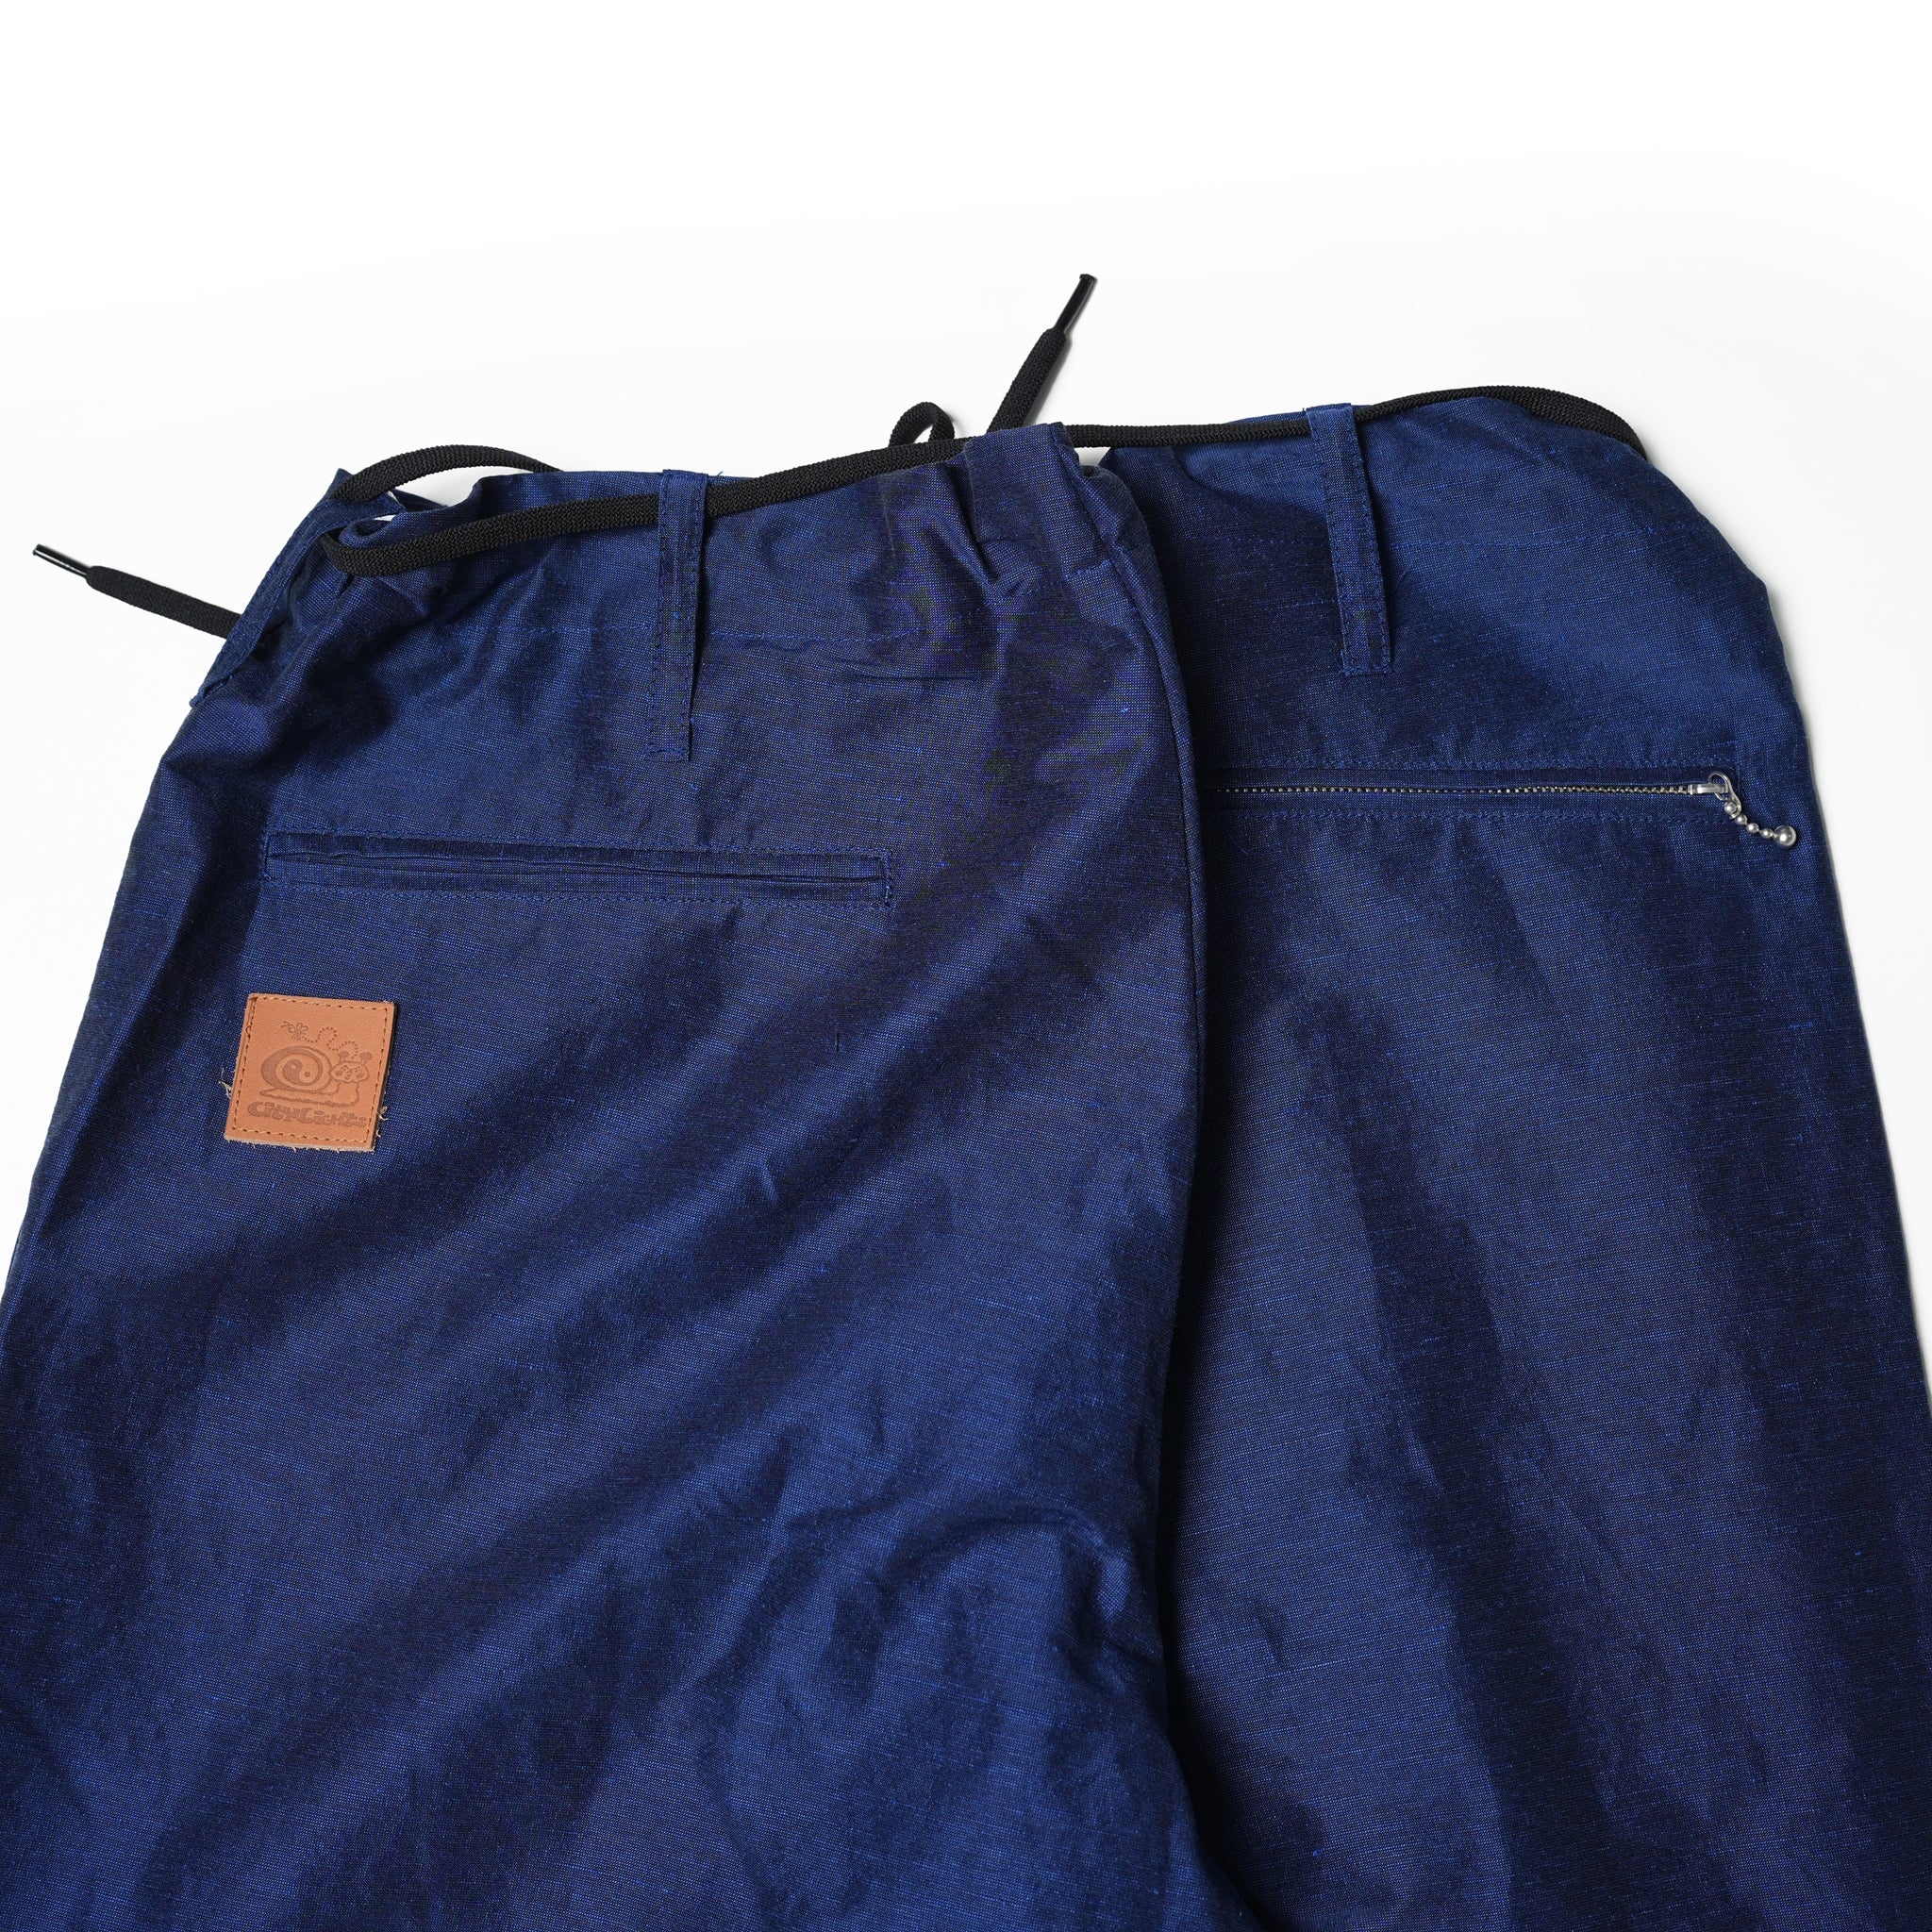 Name: Non-Elastic E-Z Pants Dead Stock Fabric Collection | Color:Blue | Size: One Fits All 【CITYLIGHTS PRODUCTS_シティライツプロダクツ】